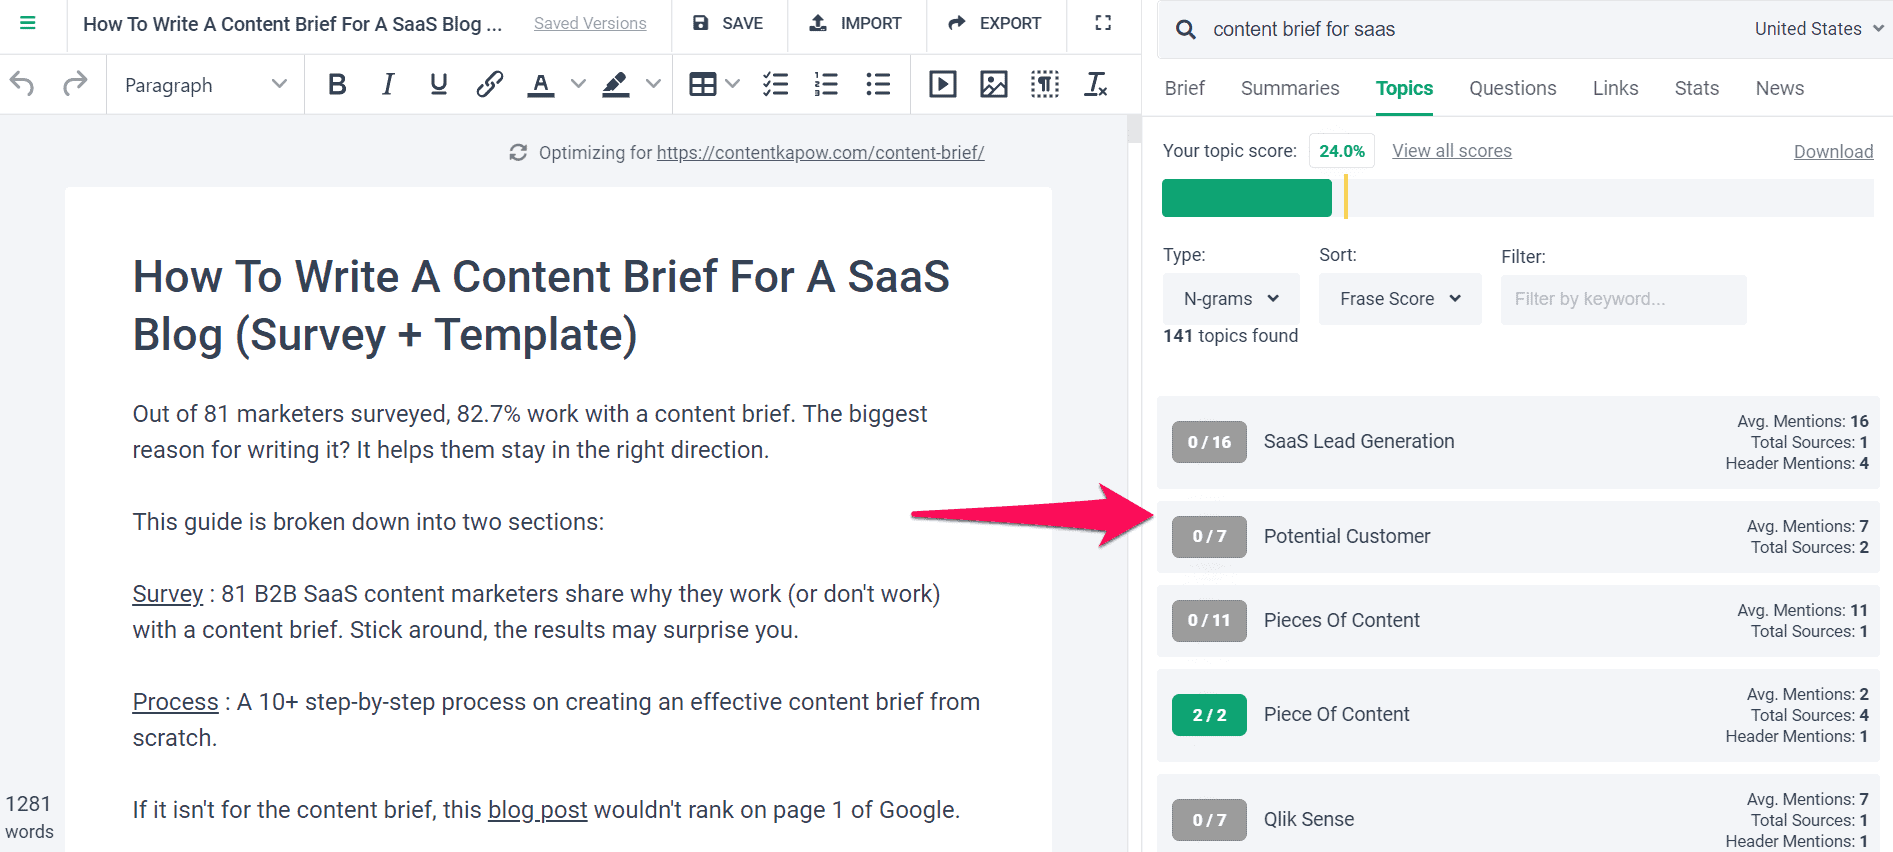 Frase- How to write a content brief for a saas blog